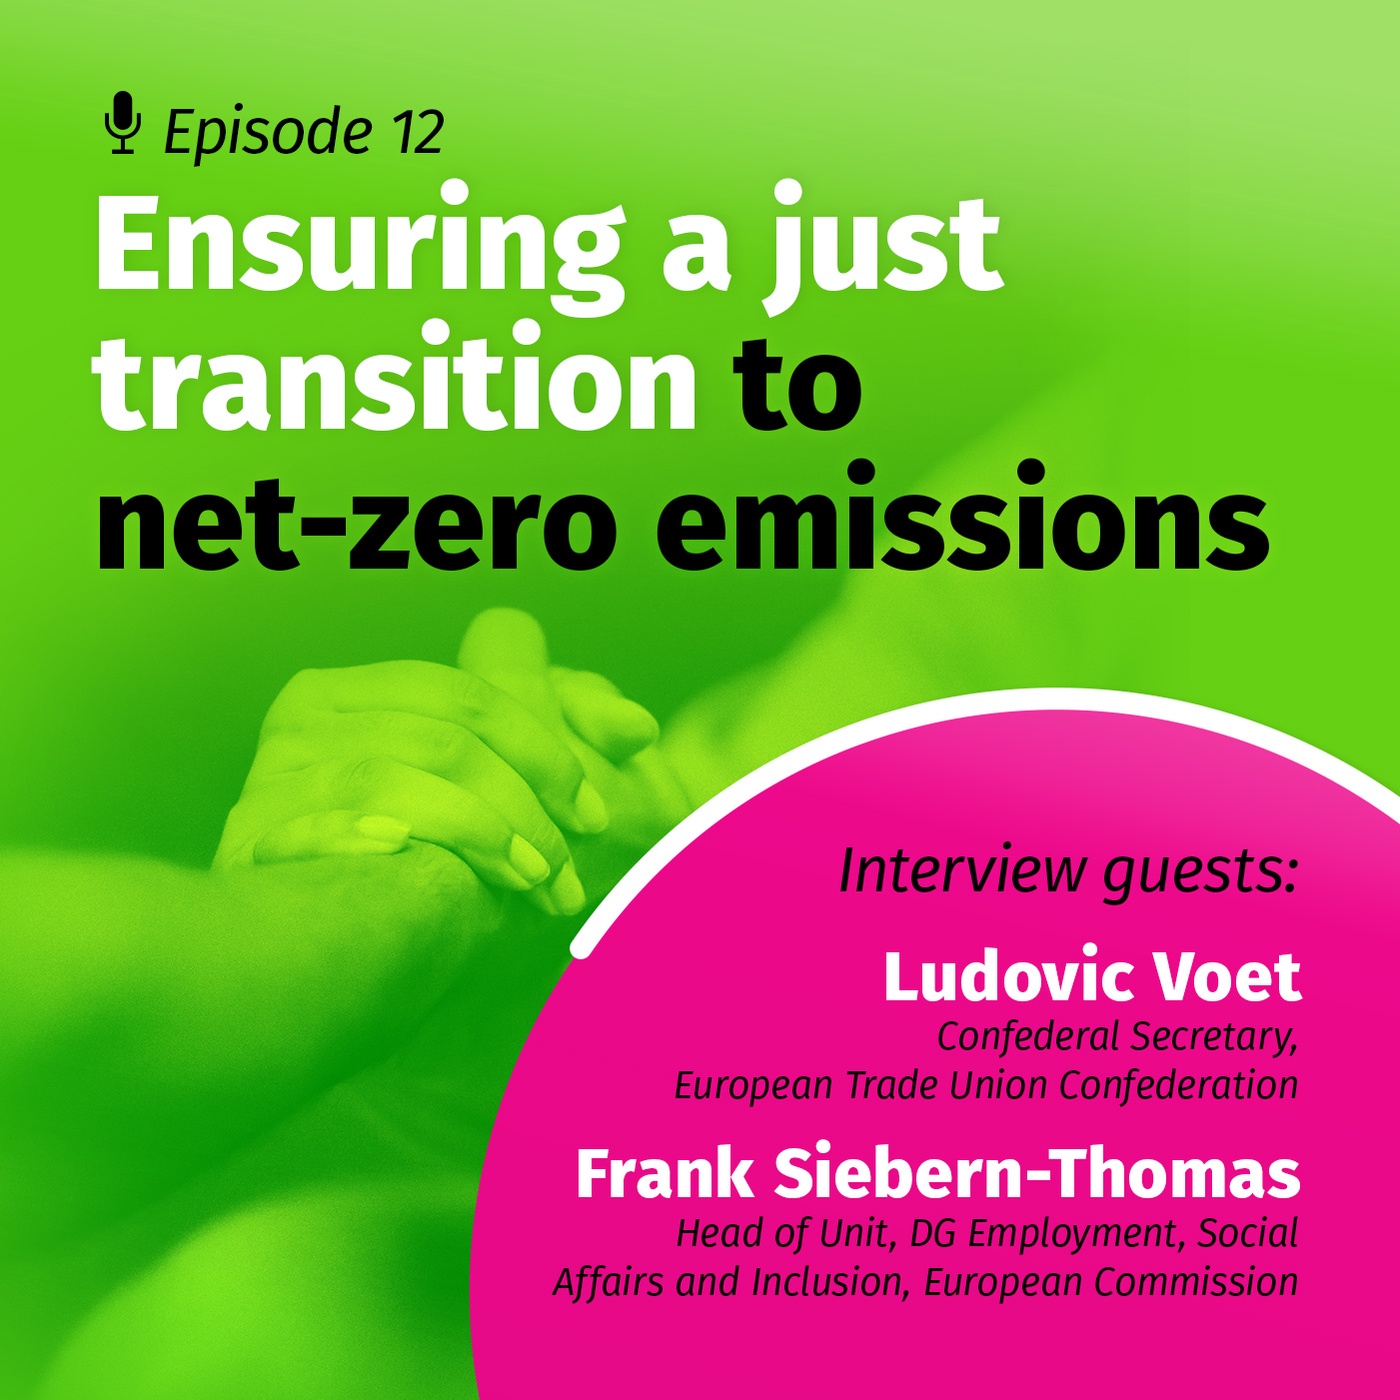 Ensuring a Just Transition to net-zero emissions